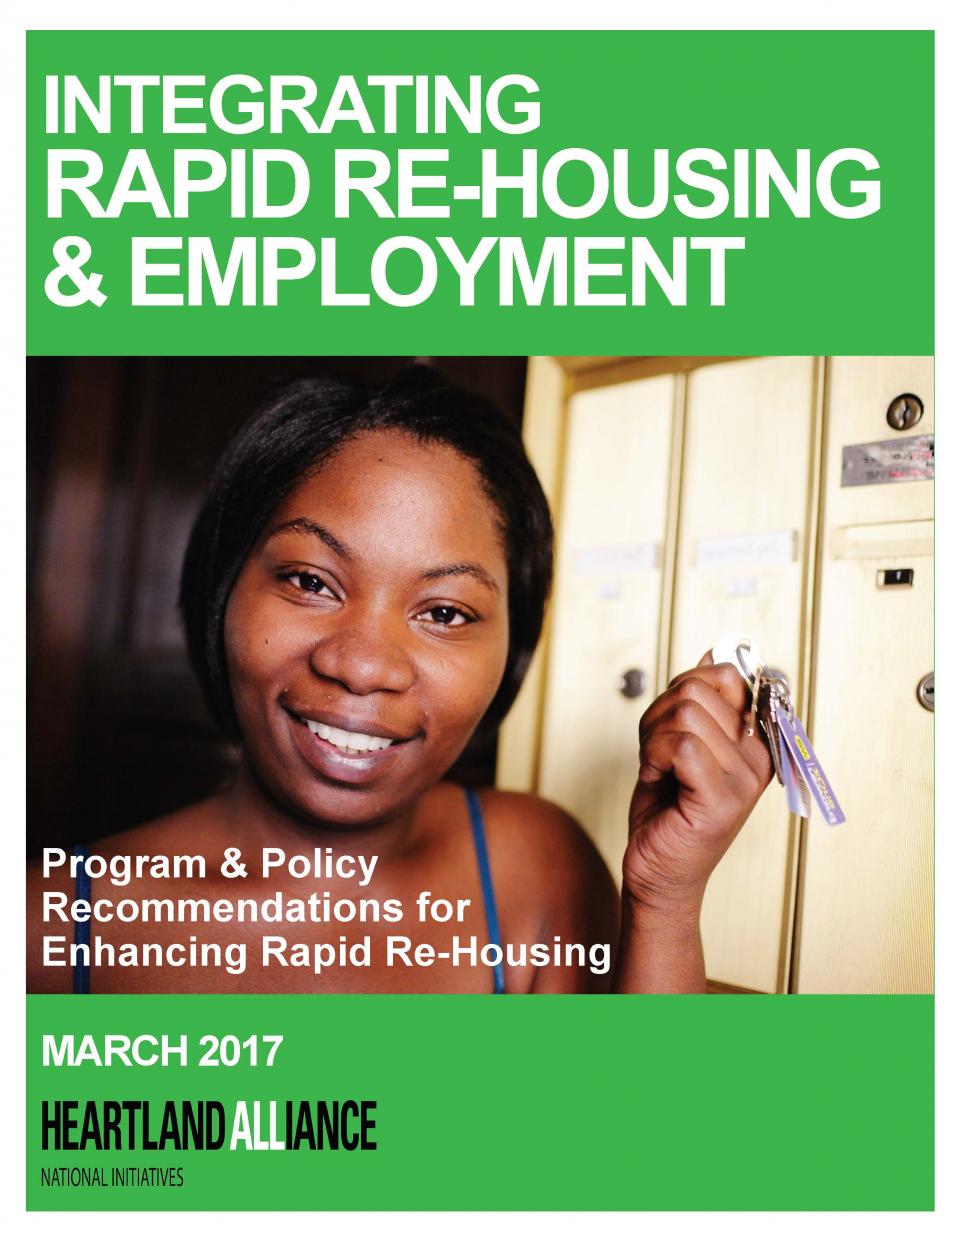 New paper released about integrating Rapid Re-Housing and Employment  Programs